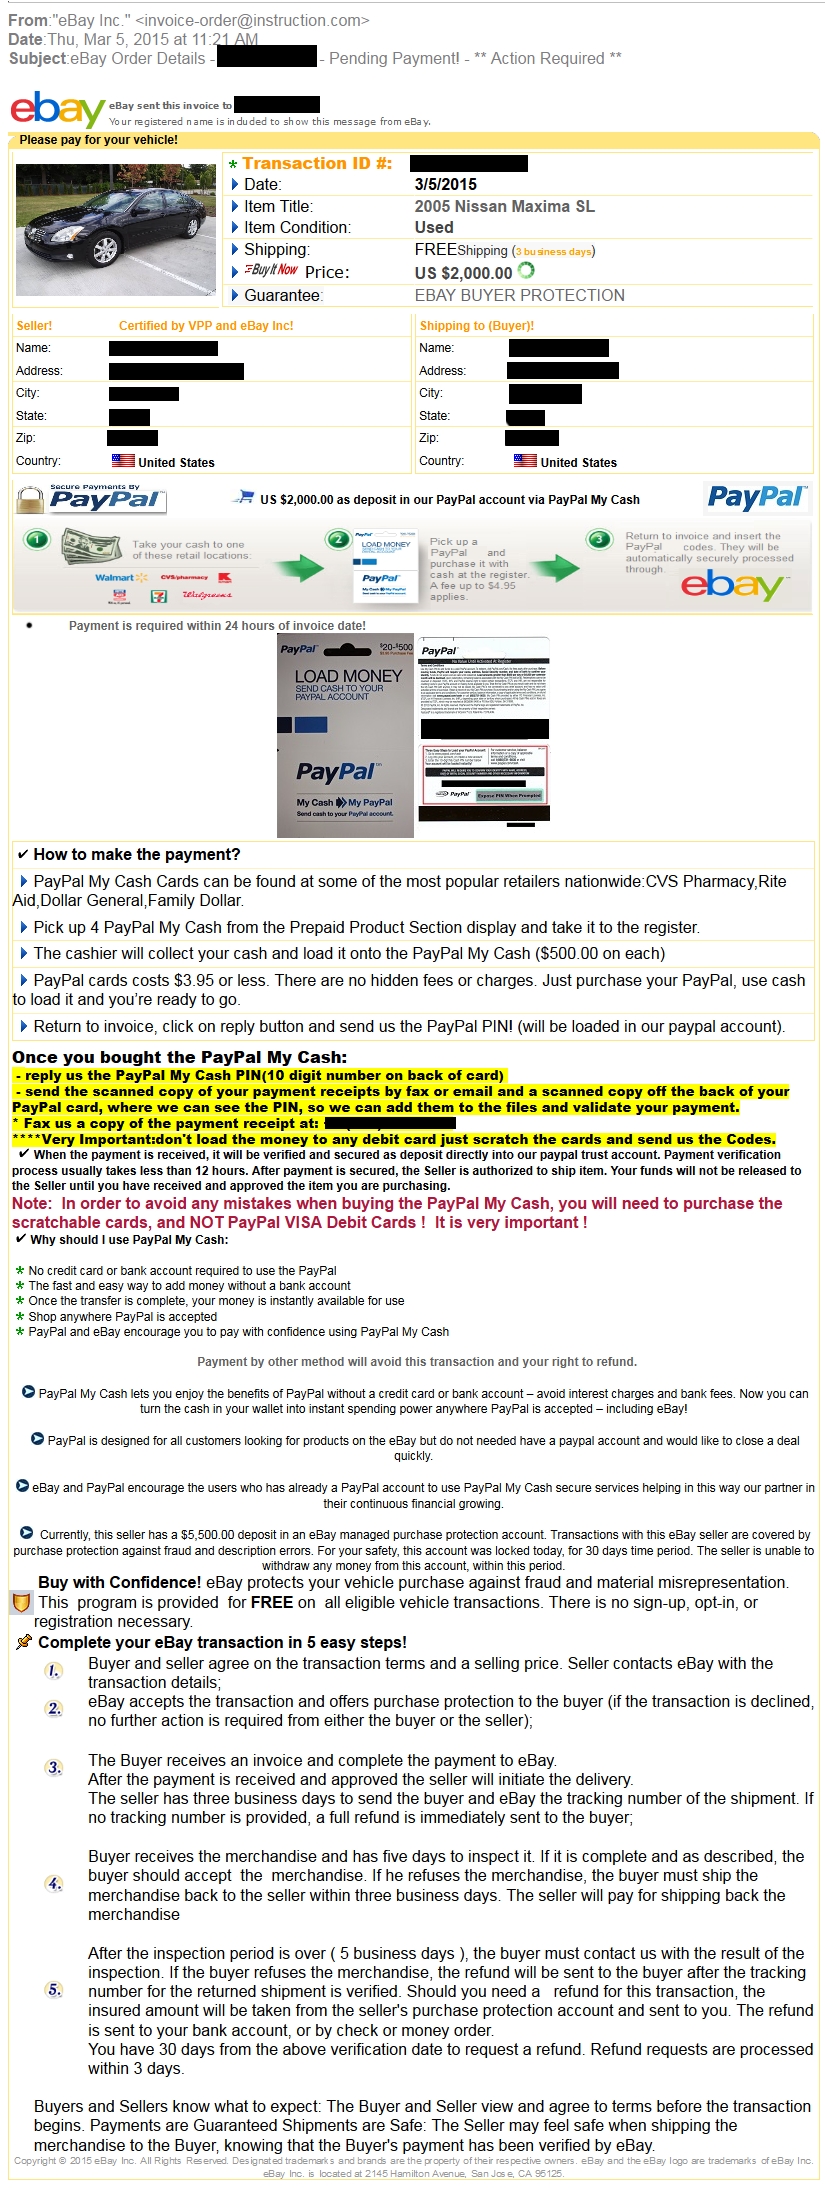 ebay motors security center paypal invoice buyer protection